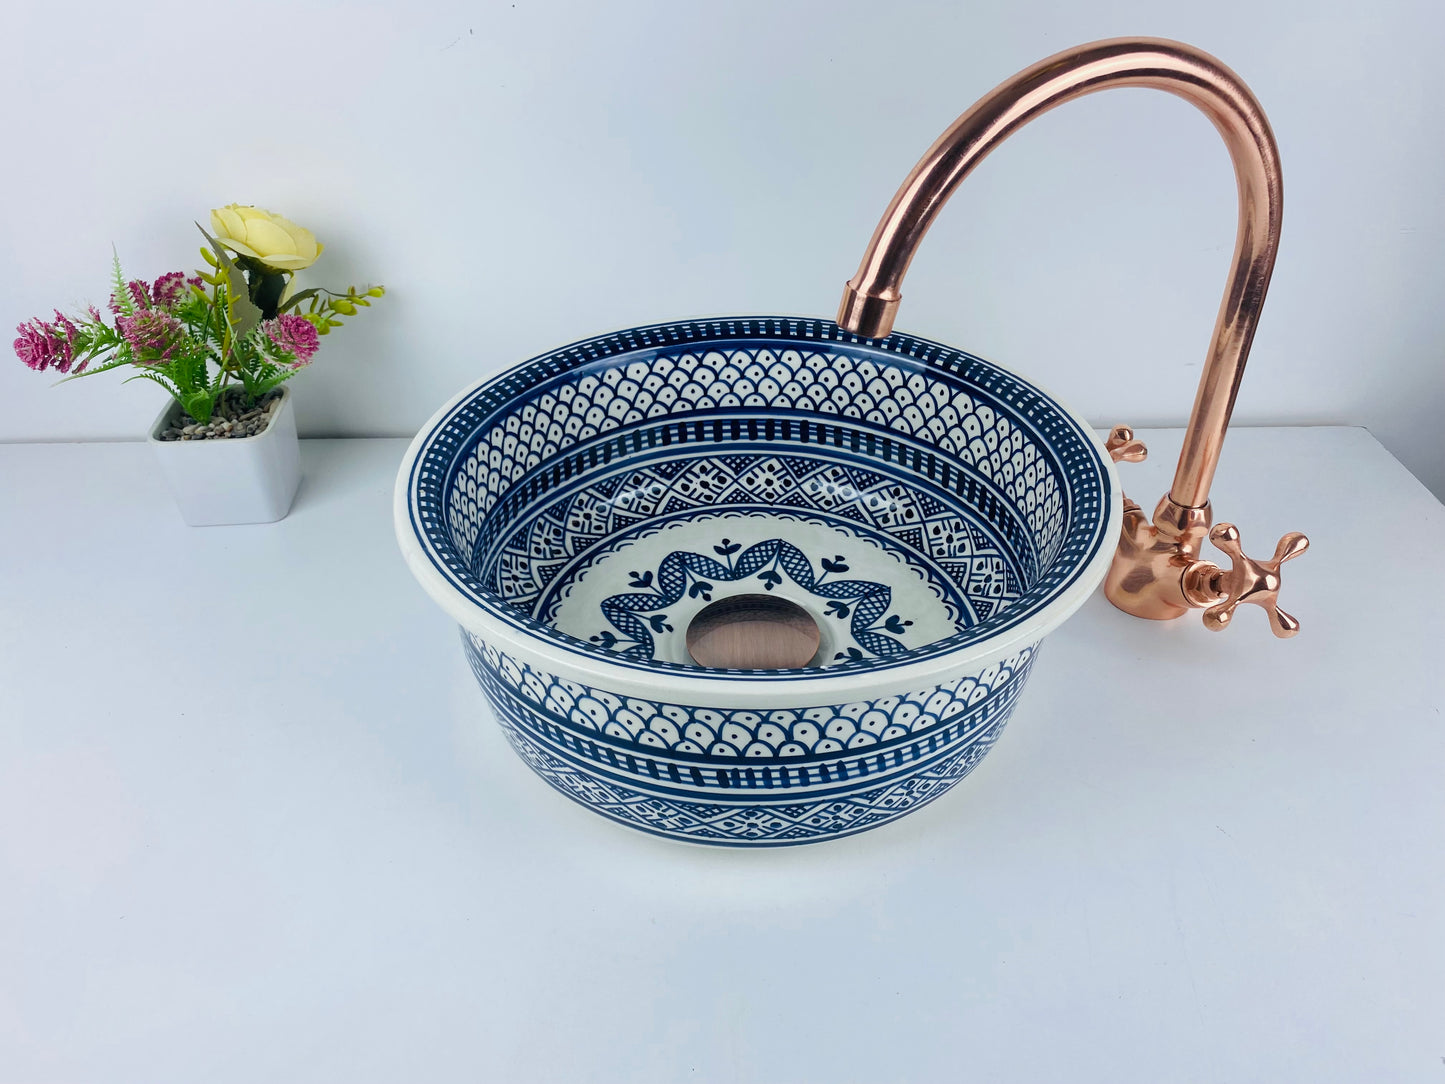 Bathroom vessel sink White and Blue 100% handmade hand painted - ceramic sink decor built with mid century modern Flair